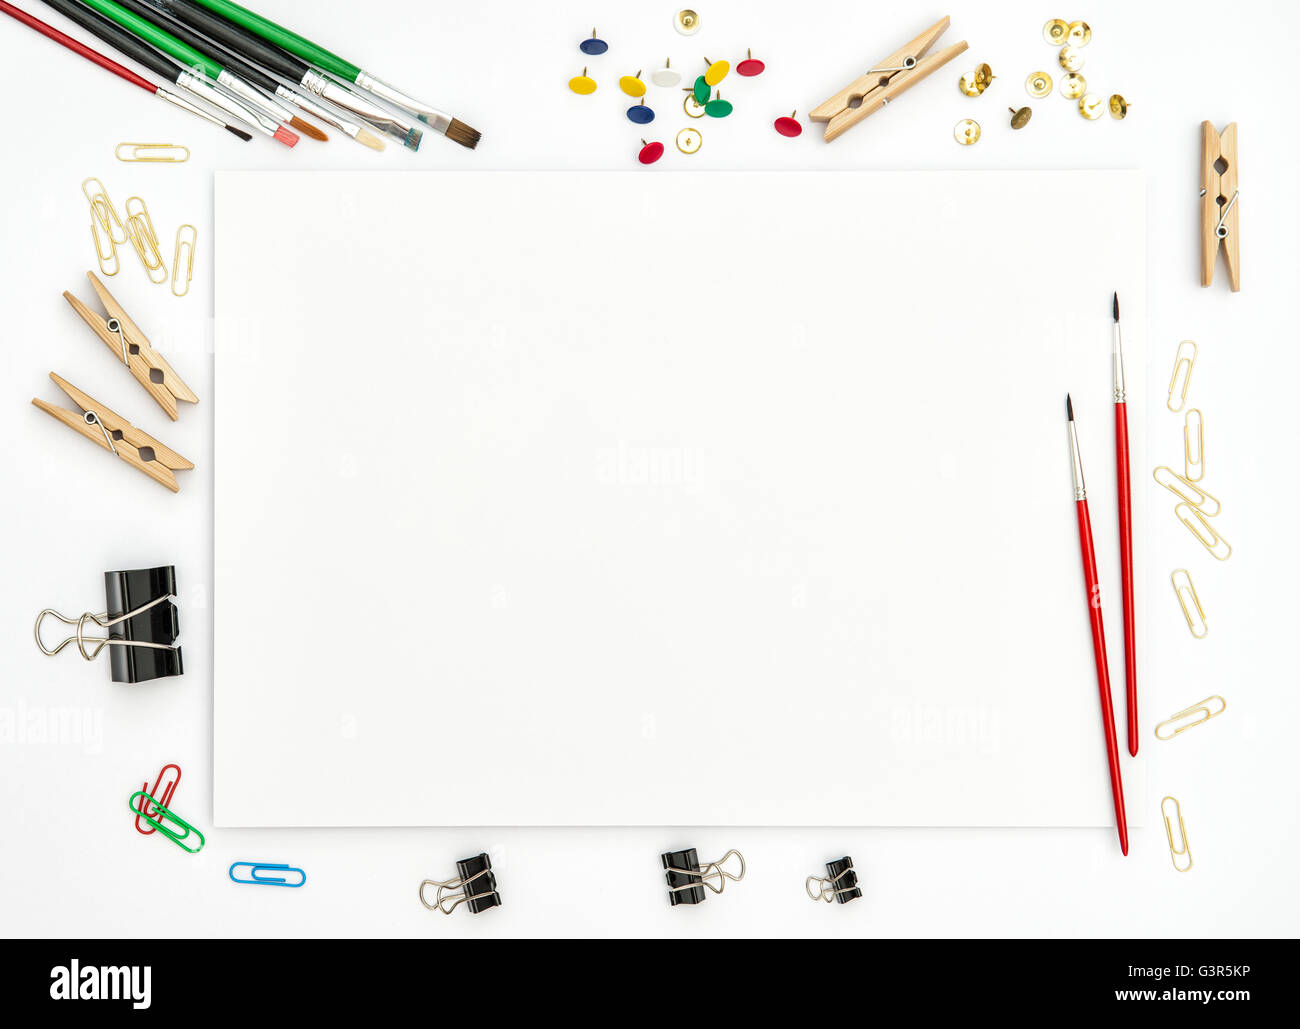 Sketchbook, brushes, paper, office supplies on white background. Artistic flat lay Stock Photo